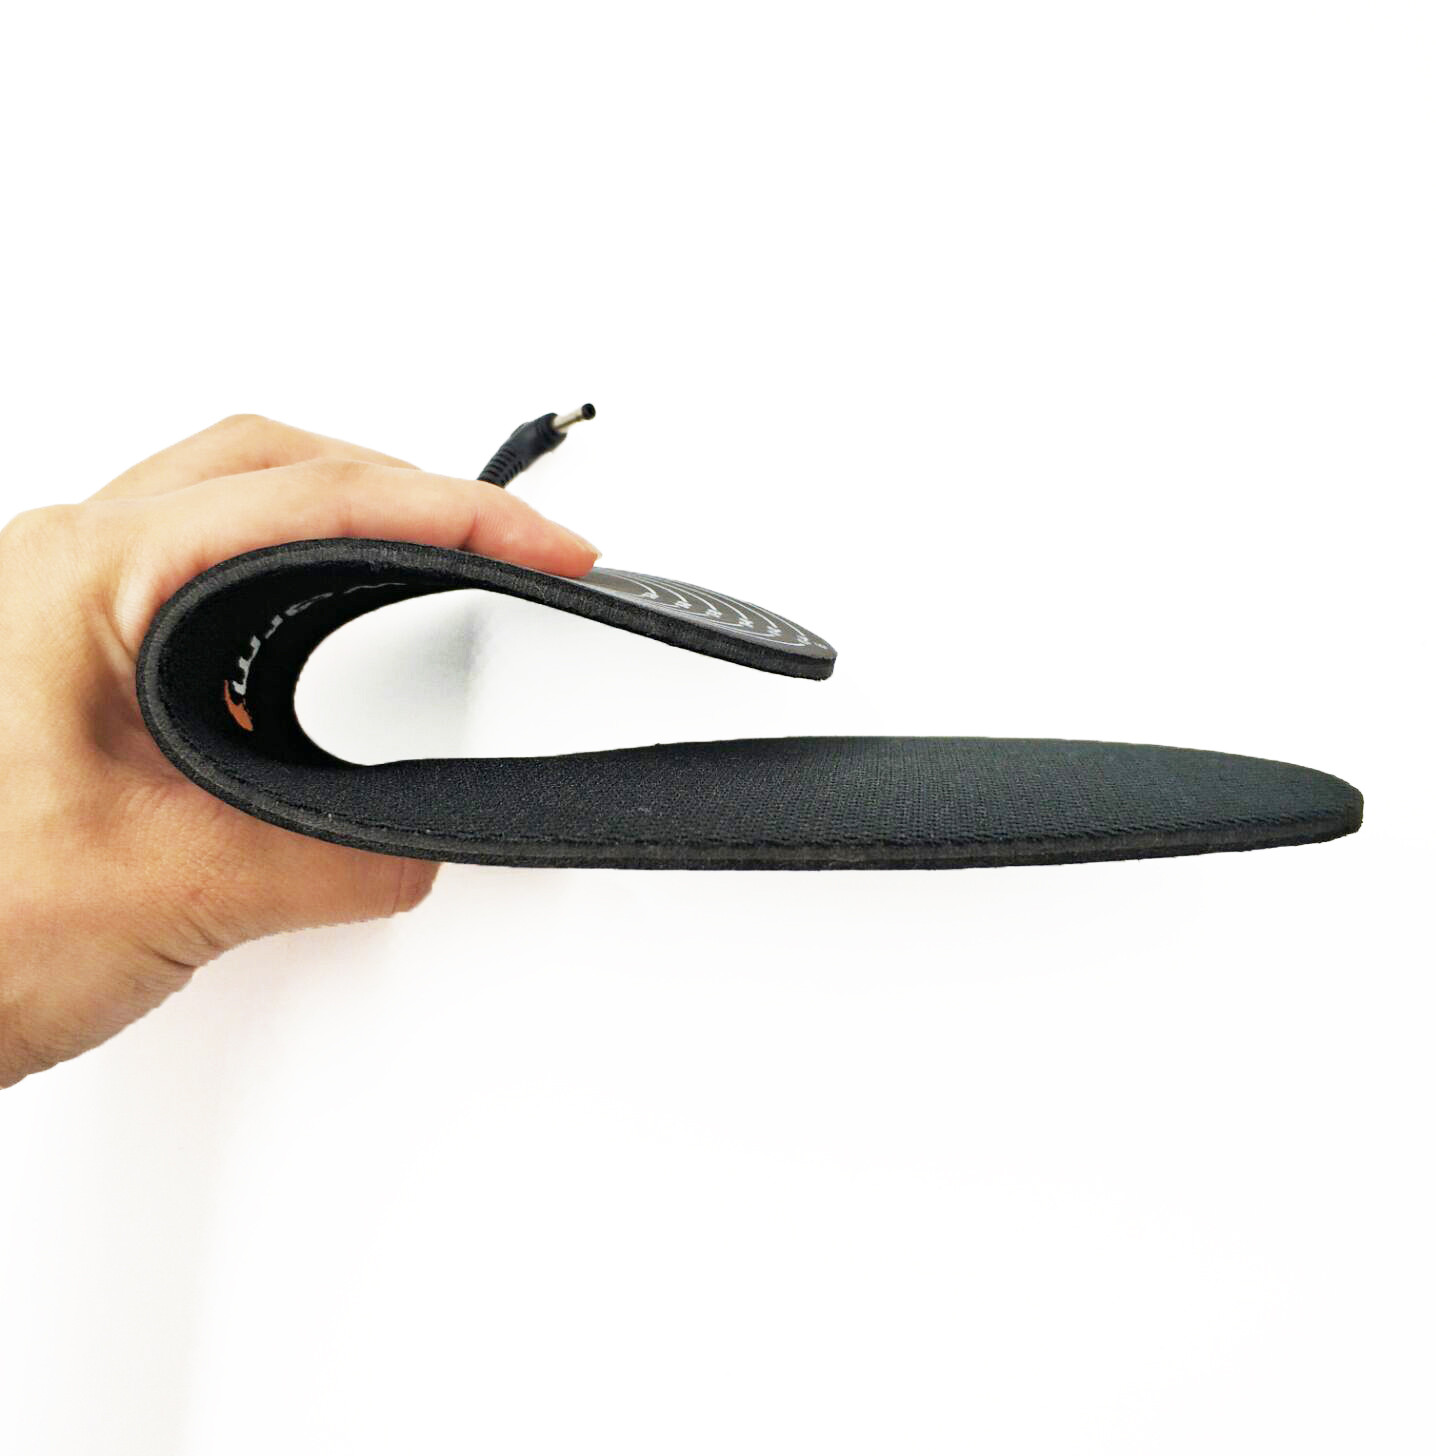 Dr. Warm electric electric shoe insoles fit to most shoes for indoor use